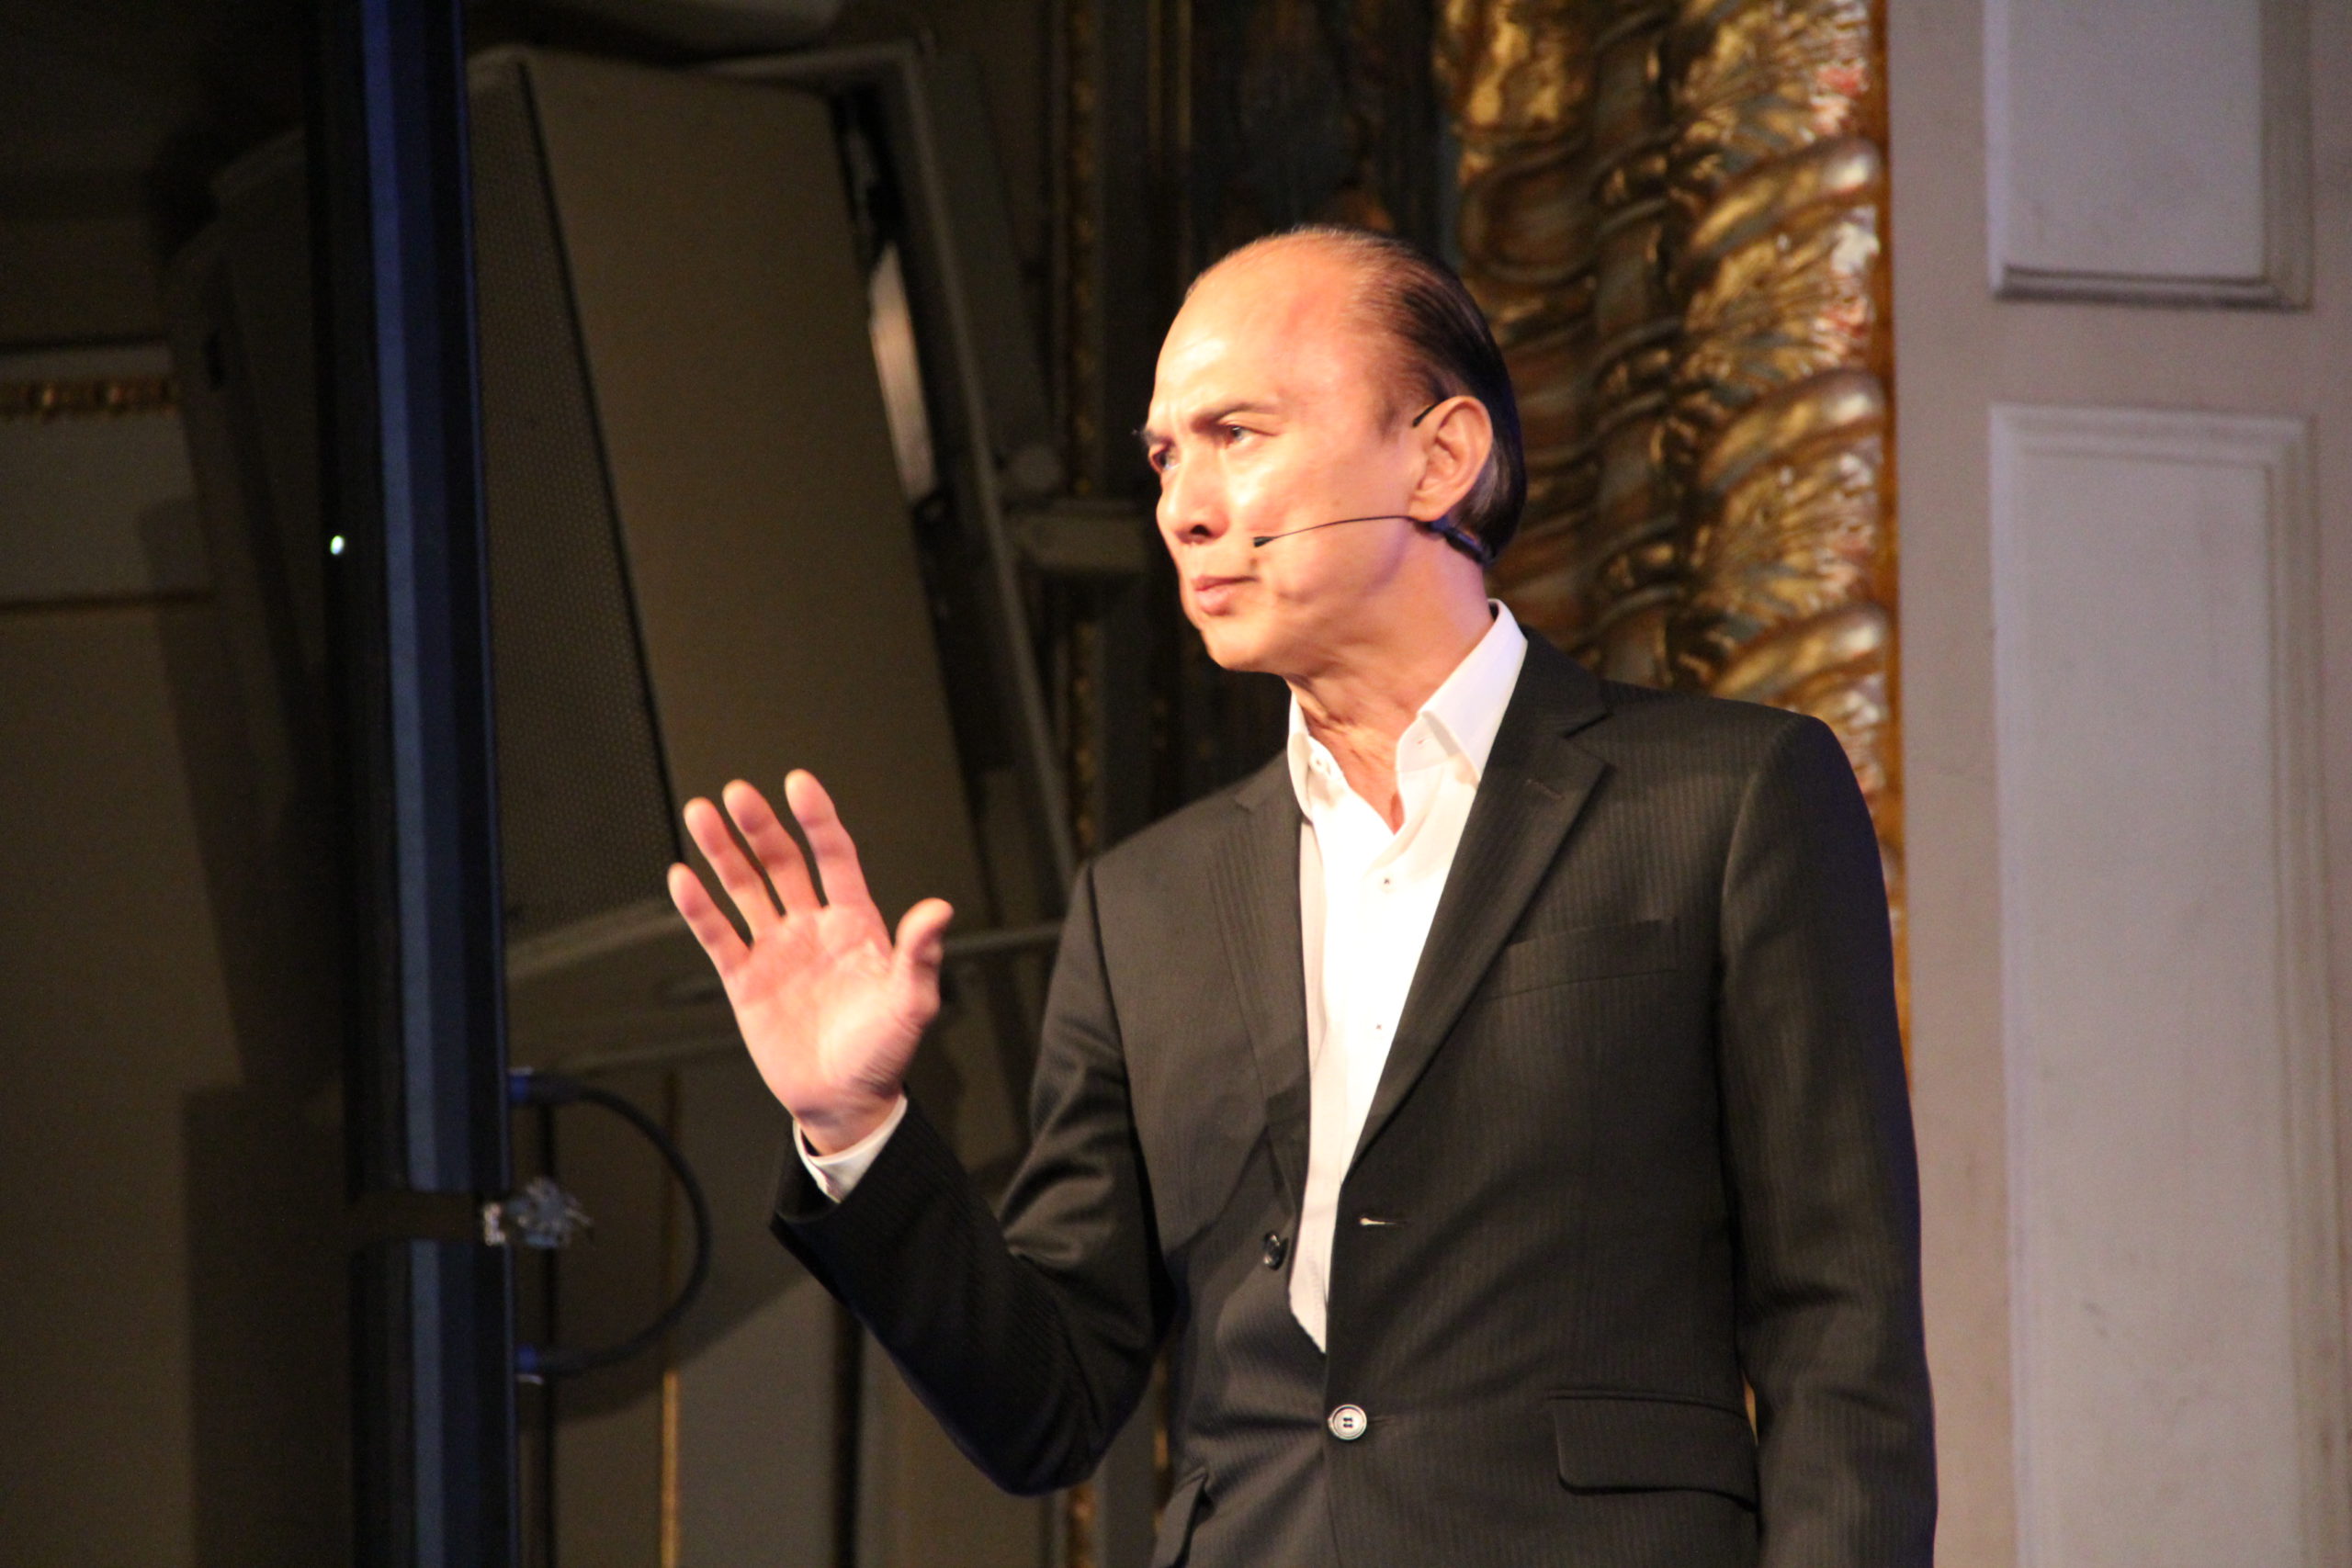 Exclusive interview with fashion designer Jimmy Choo